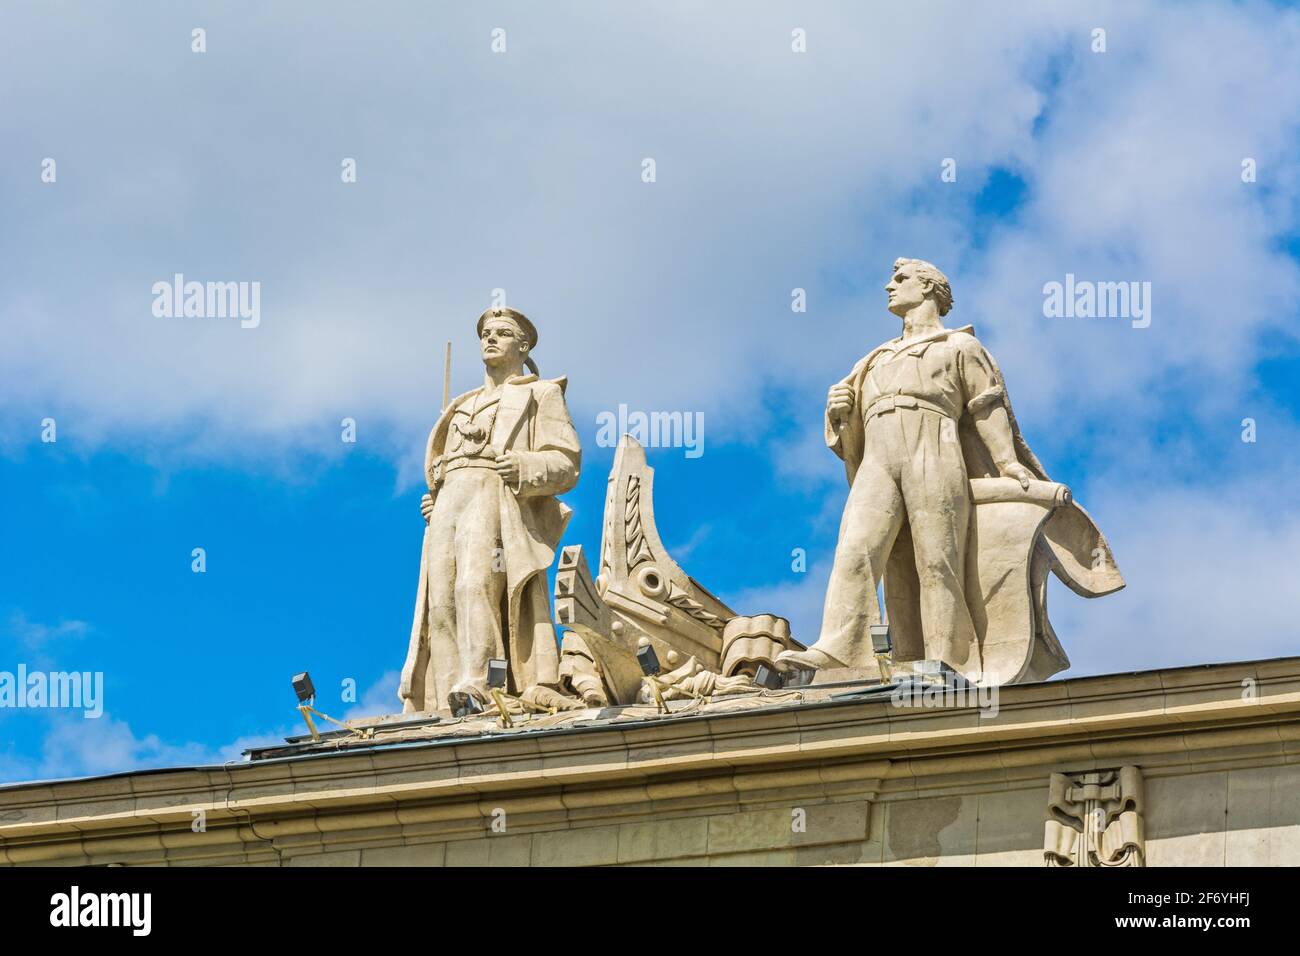 ST. PETERSBURG, RUSSIA - MAY 30, 2017: Soviet neoclassicism - statues of a sailor and engineer adorn the Residential building of employees of the Peop Stock Photo